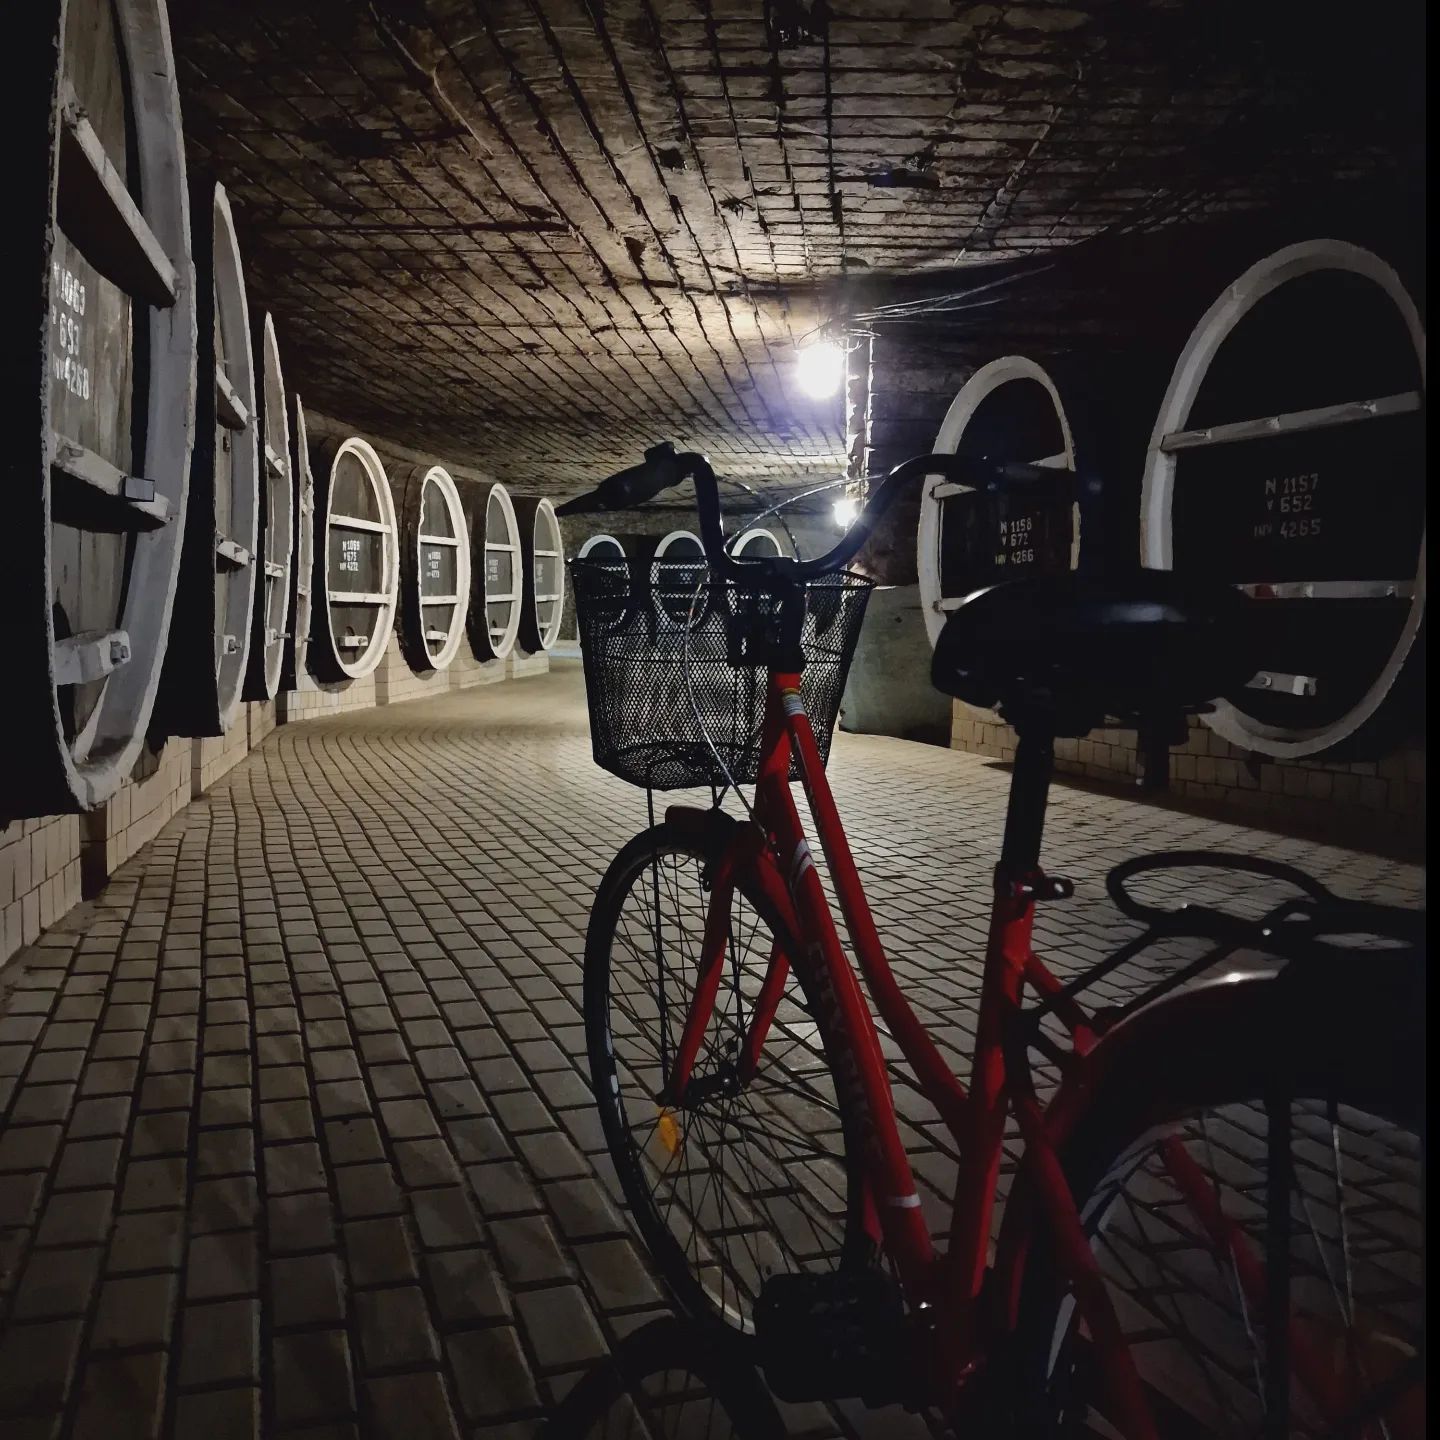 Enjoy a bike ride among thousands of barrels, in the largest underground wine cellar in the world, Milestii Mici